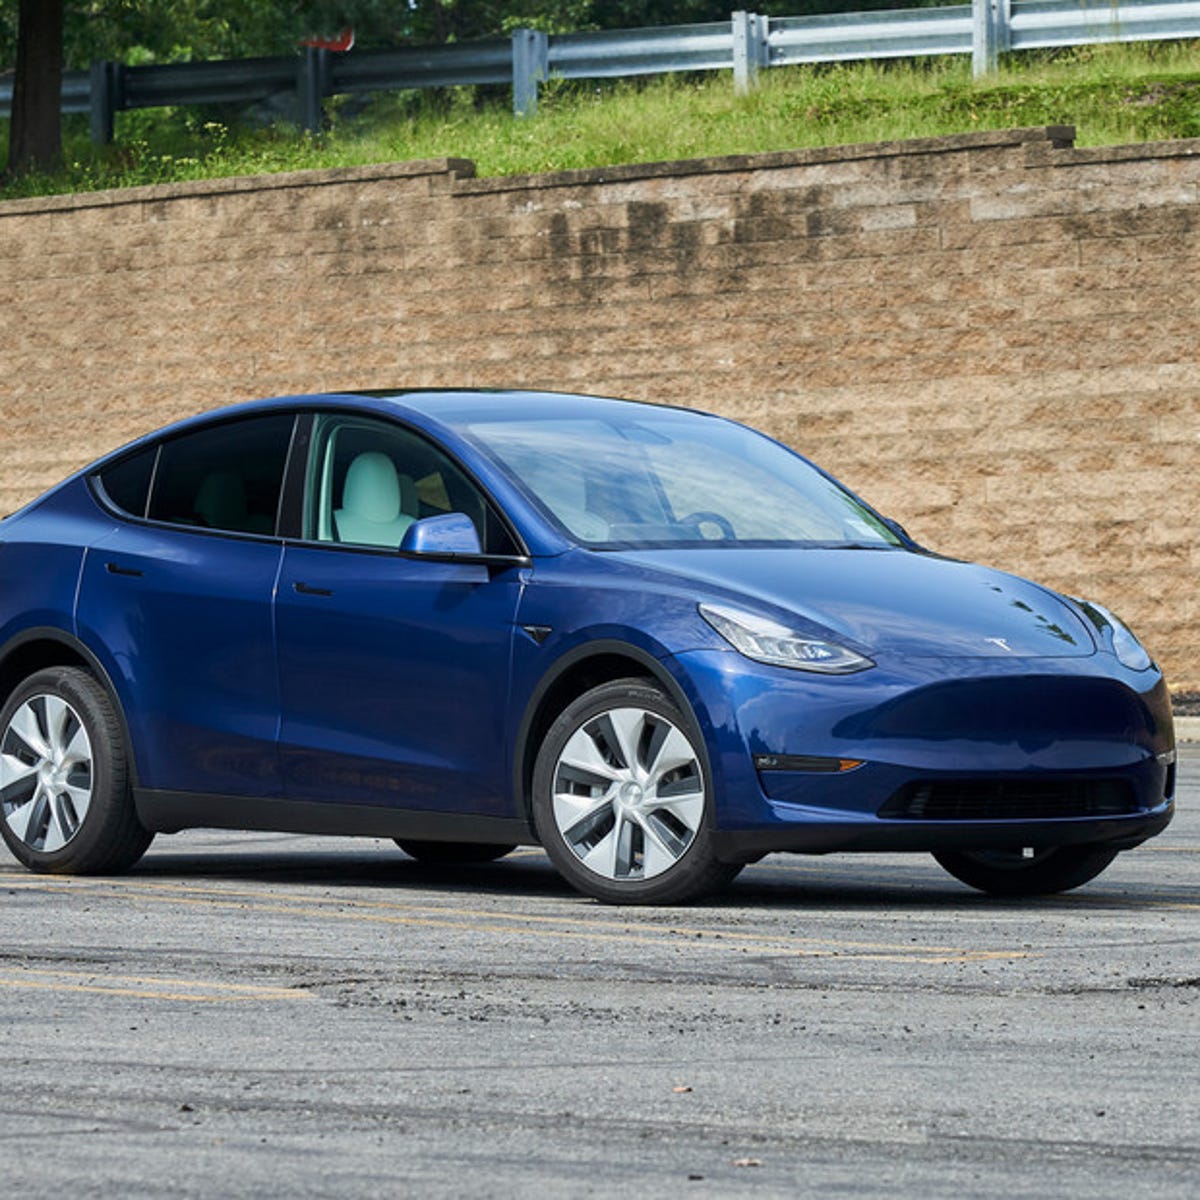 Overly Optimistic Range Calculations in Tesla Model Y and How to Address them for a Safer Long-Distance Journey